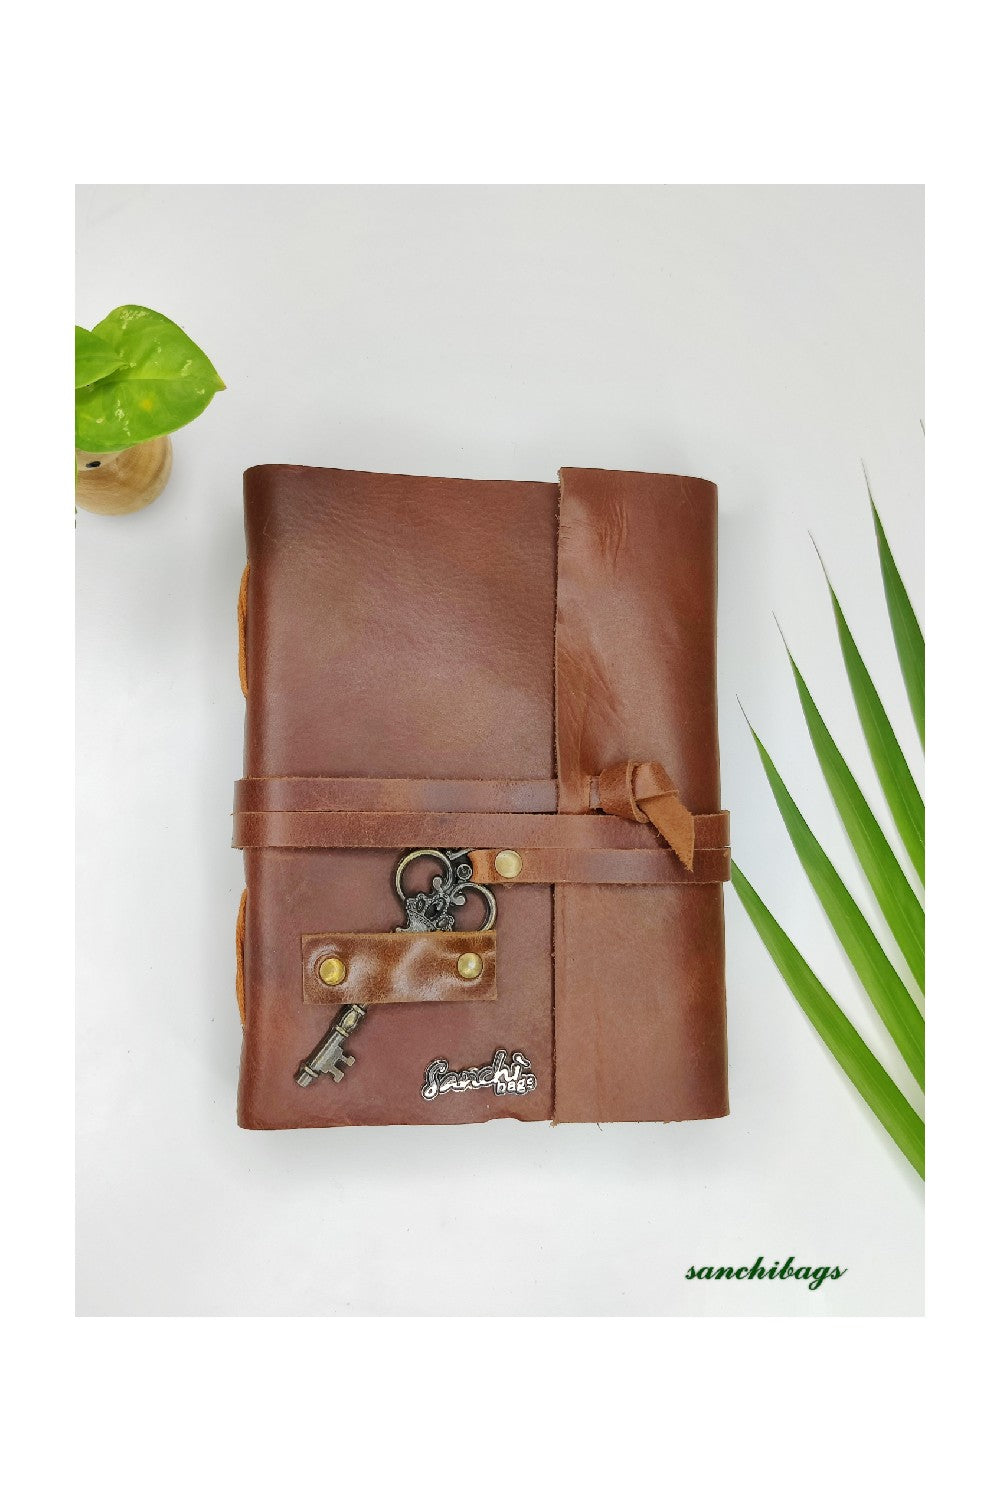 Handmade Notebook - Leather Cover